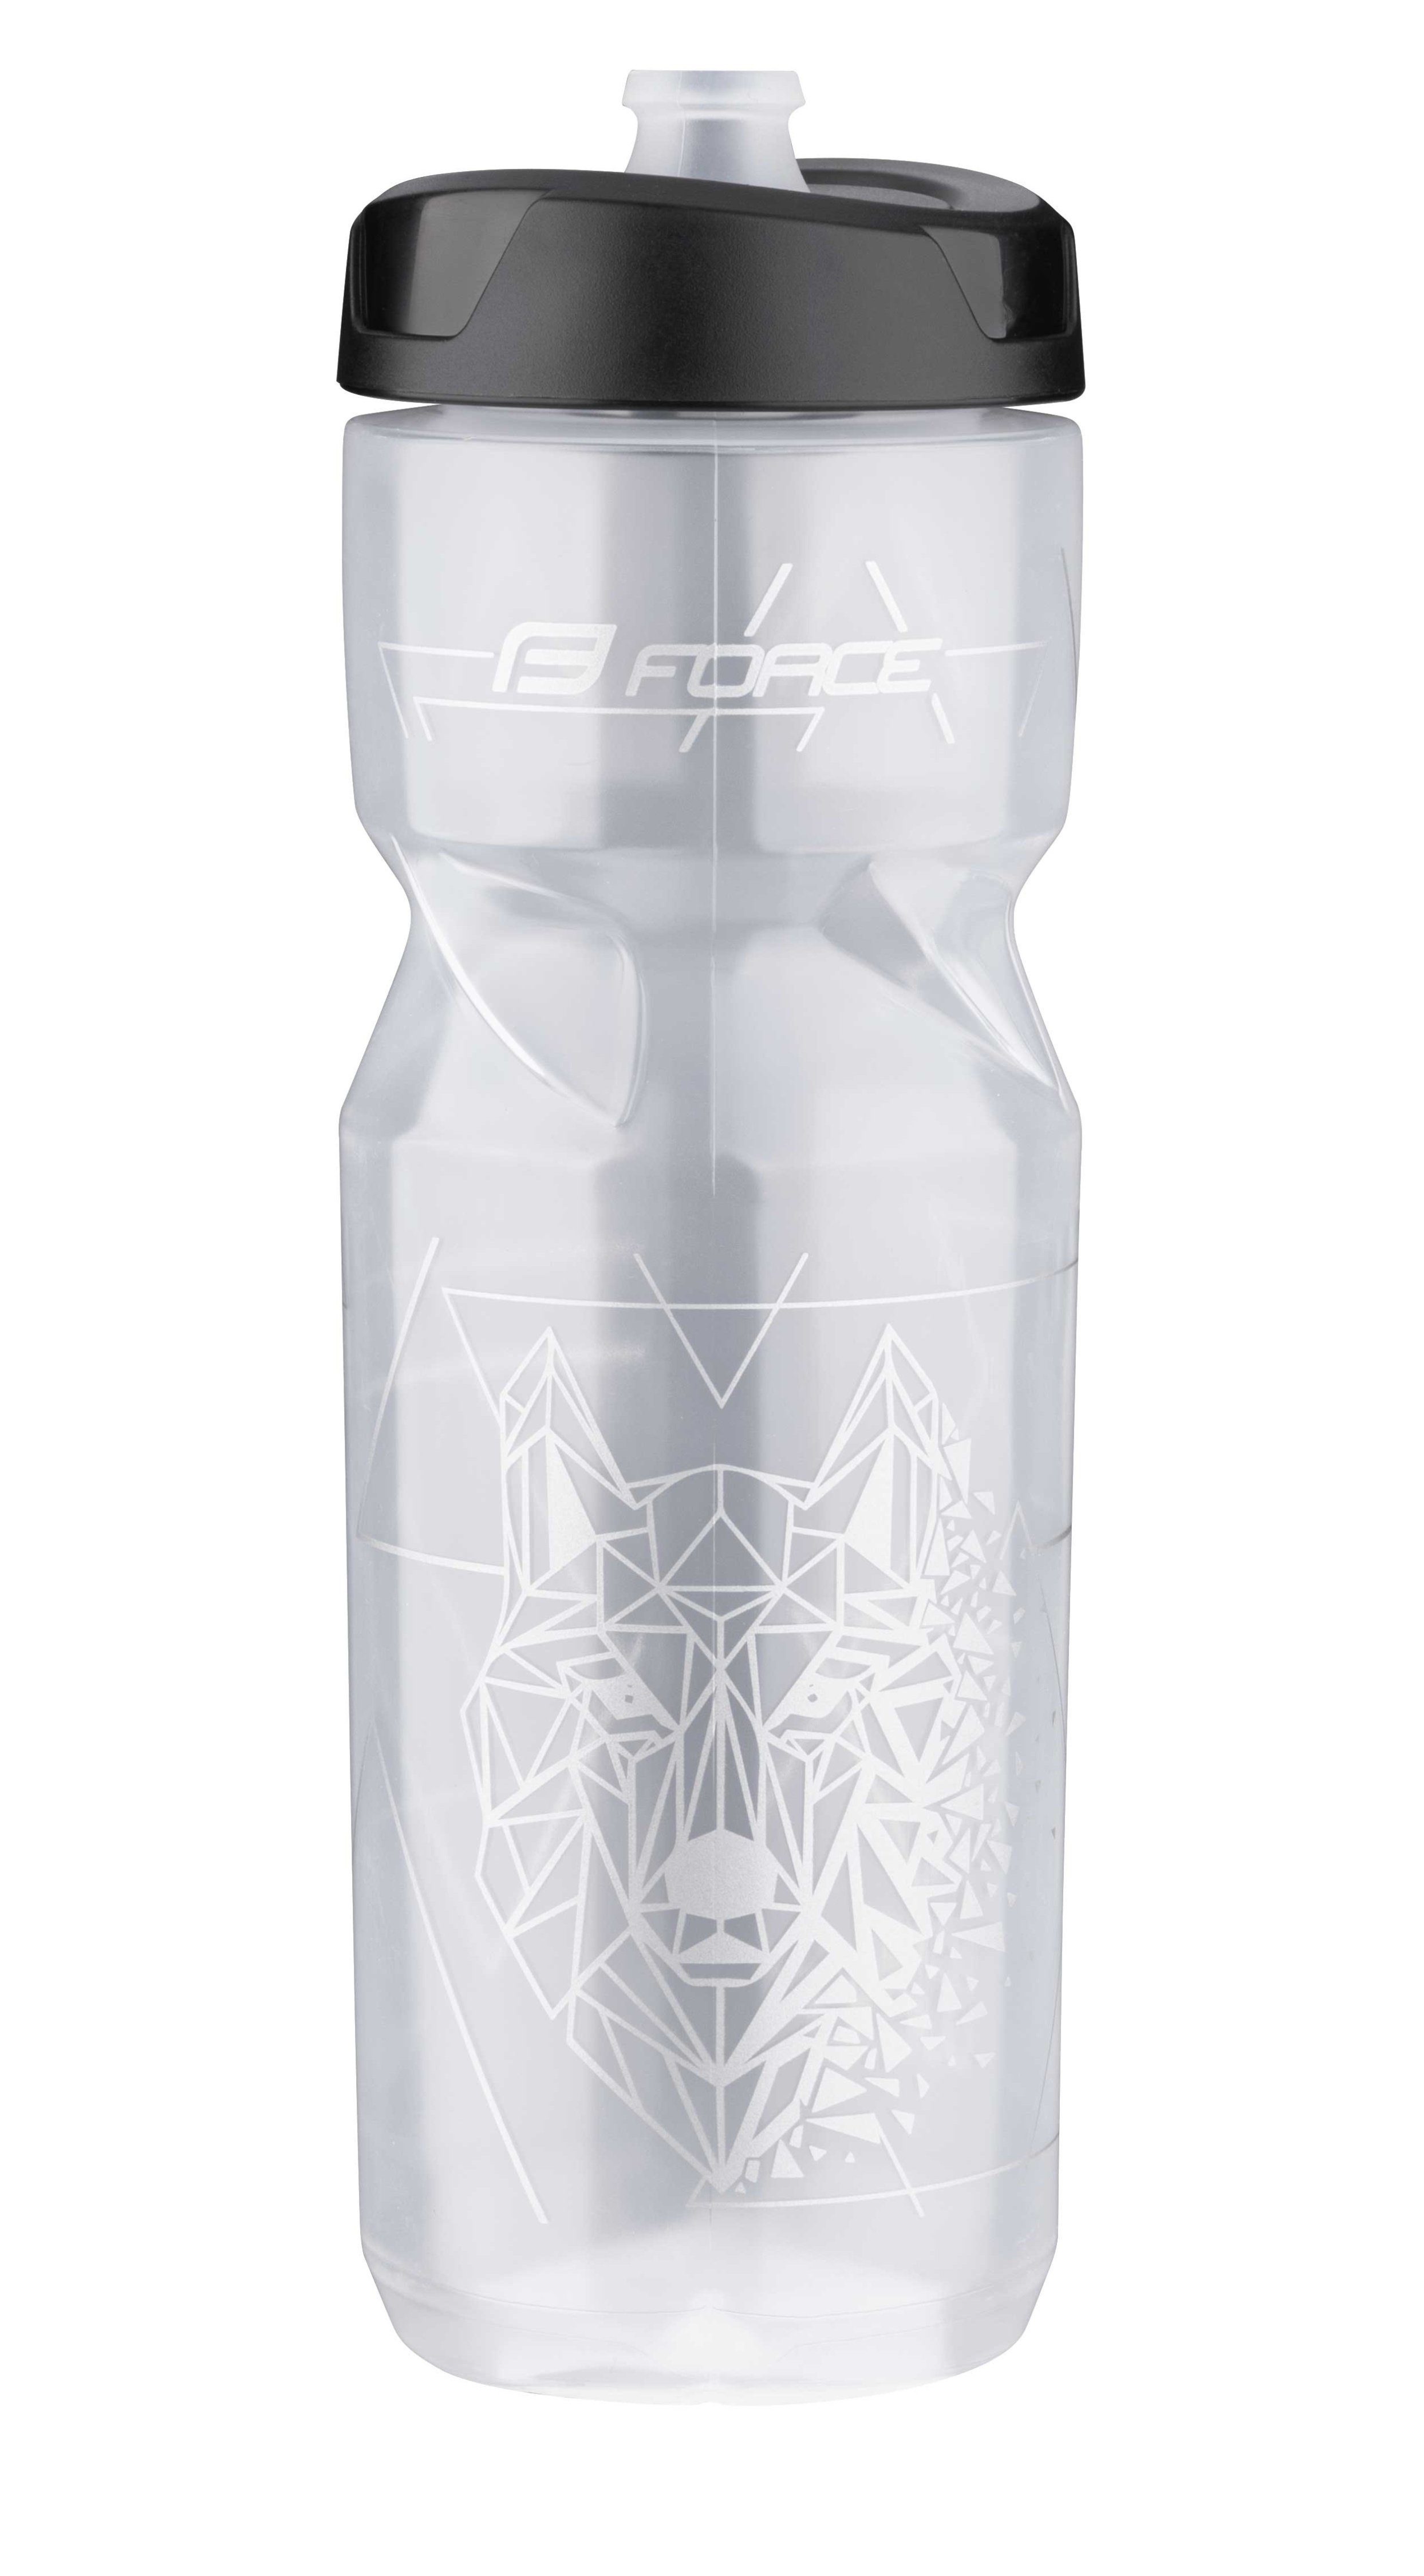 FORCE Flasche l 0,8 FORCE Trinkflasche silbrig-transparent WOLF LONE